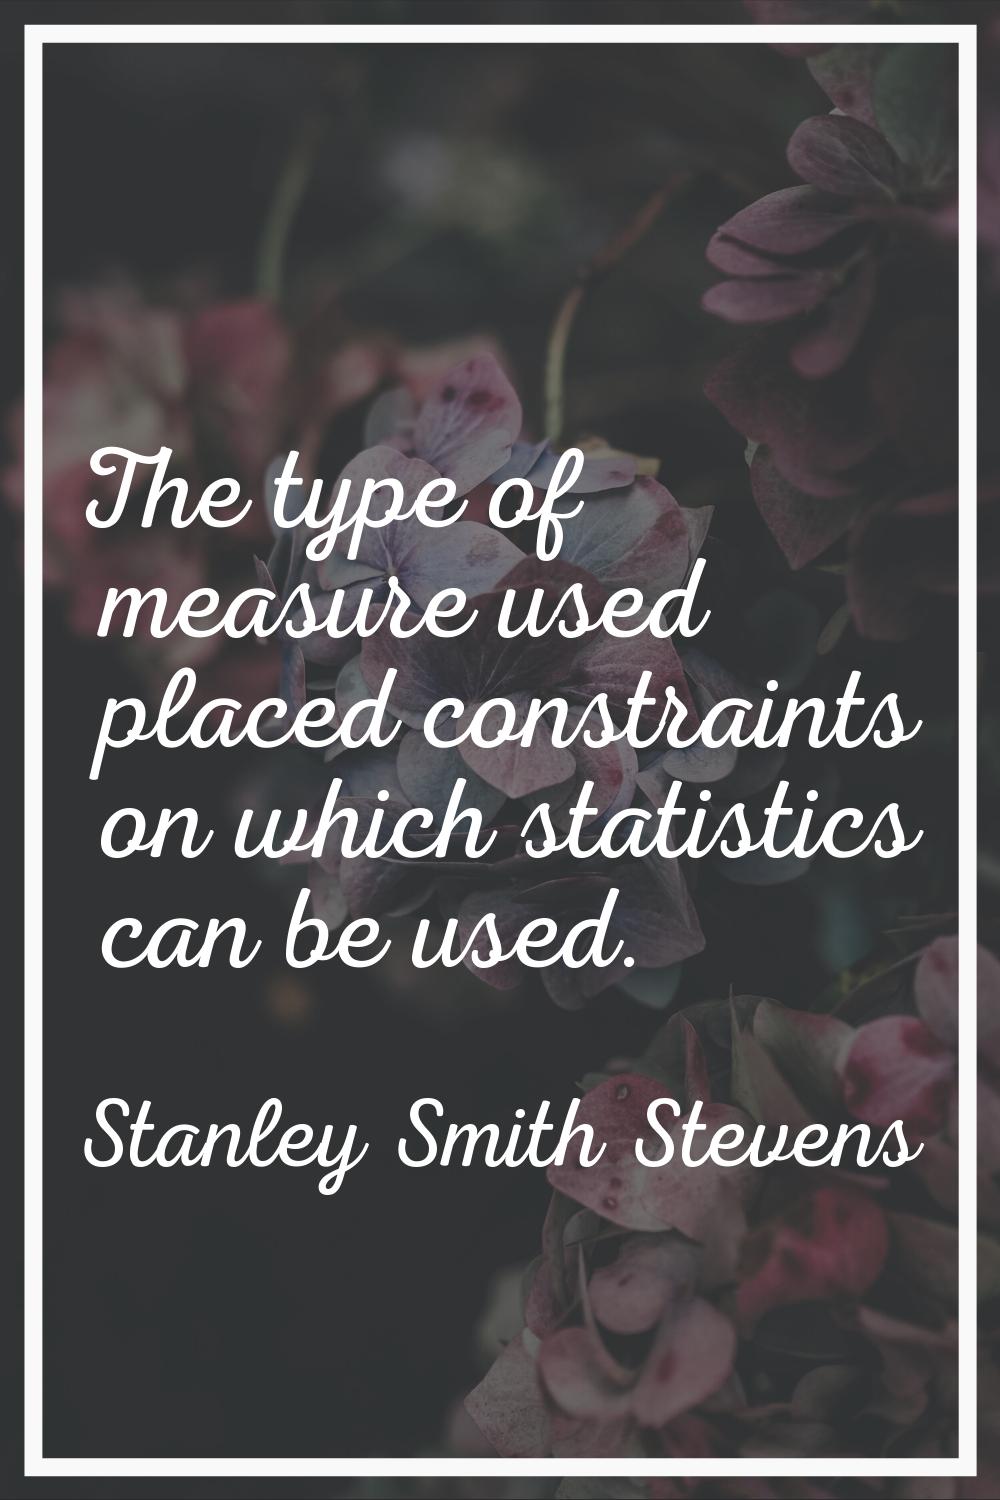 The type of measure used placed constraints on which statistics can be used.